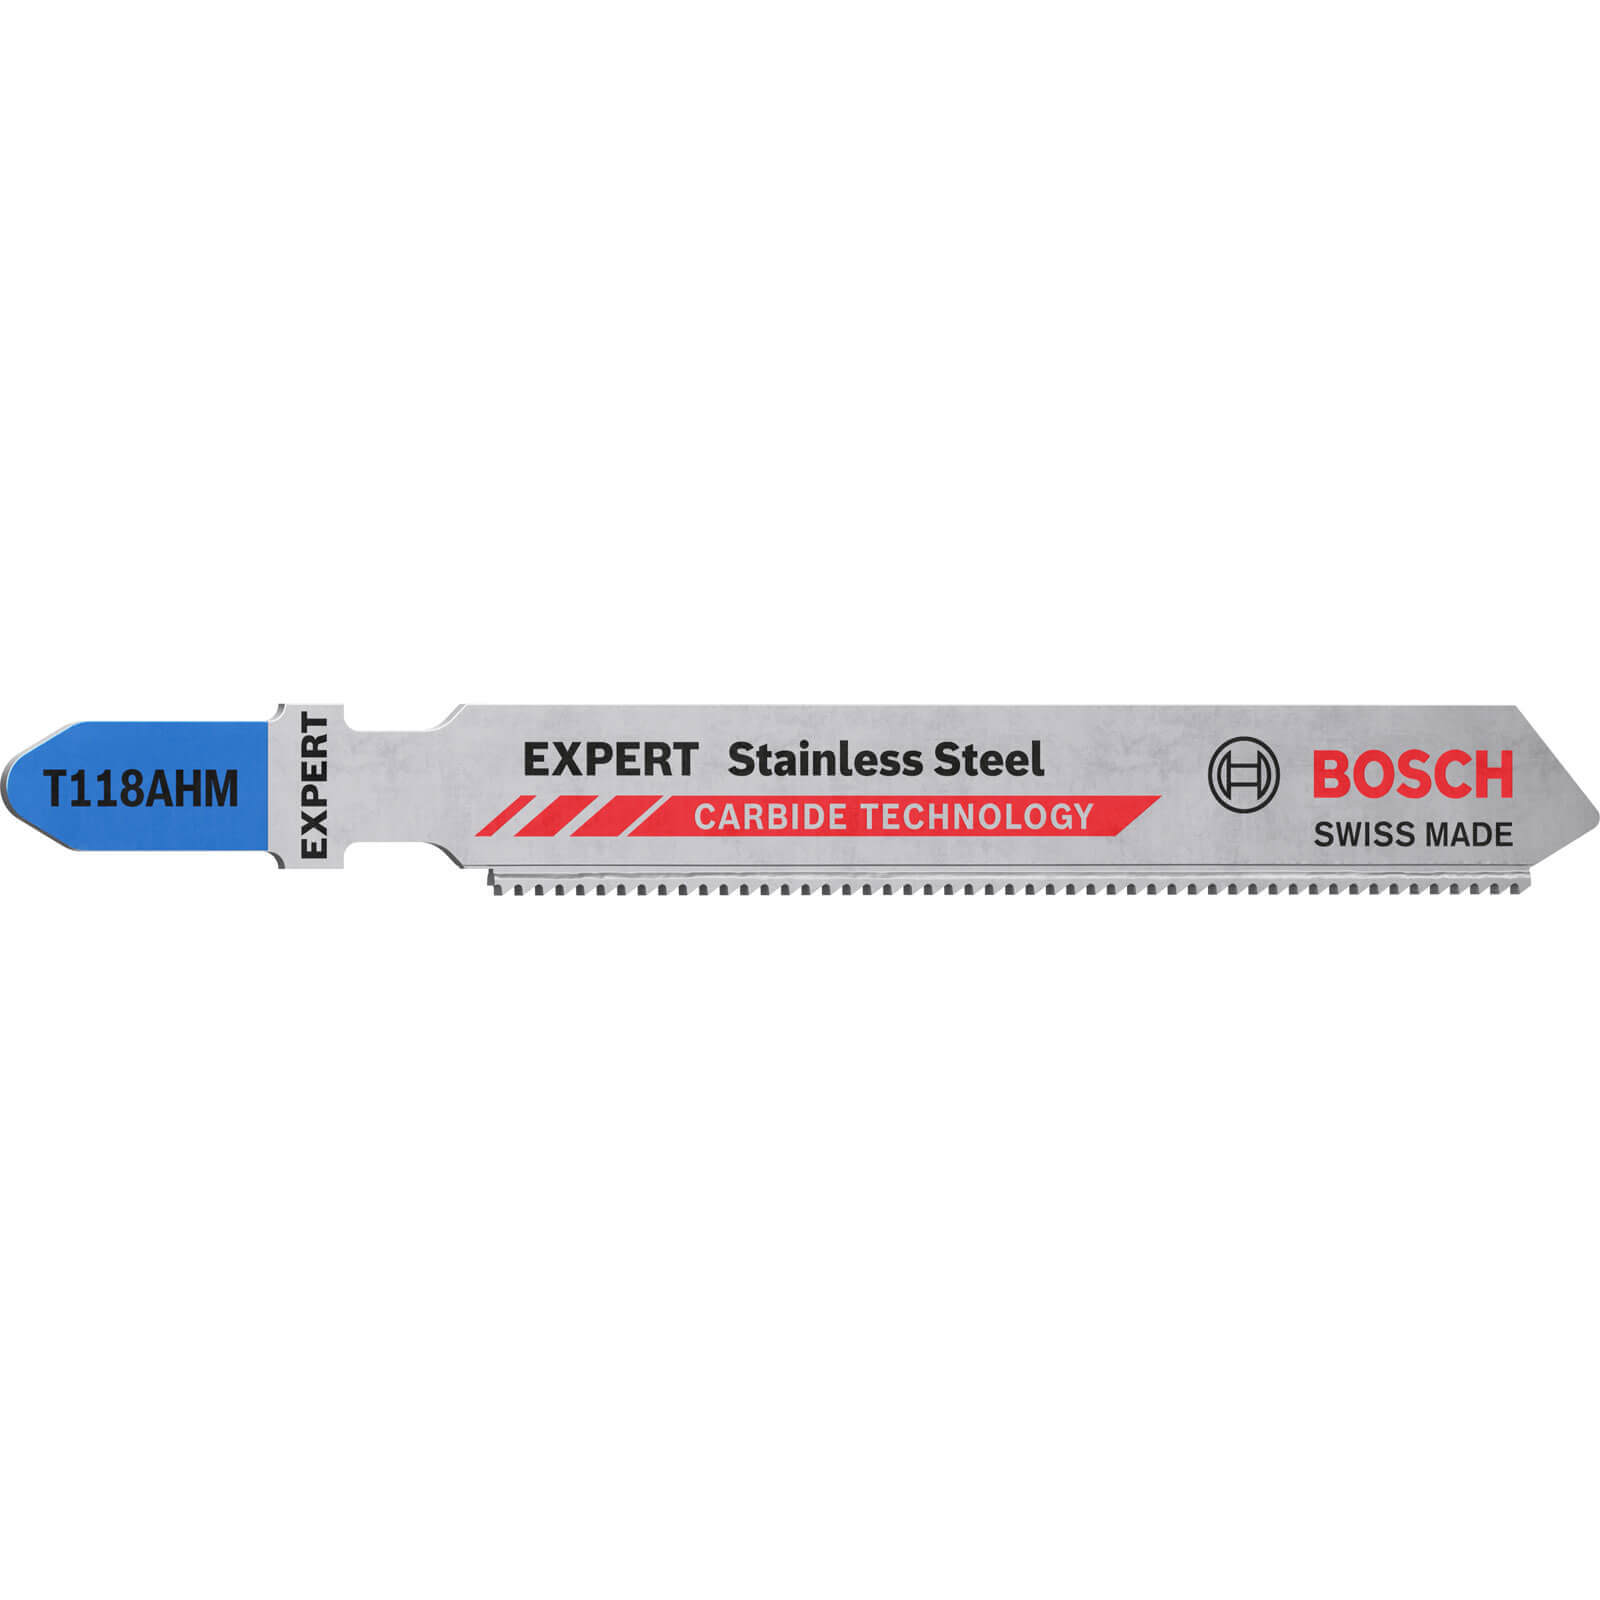 Image of Bosch Expert T118AHM Stainless Steel Jigsaw Blades Pack of 3